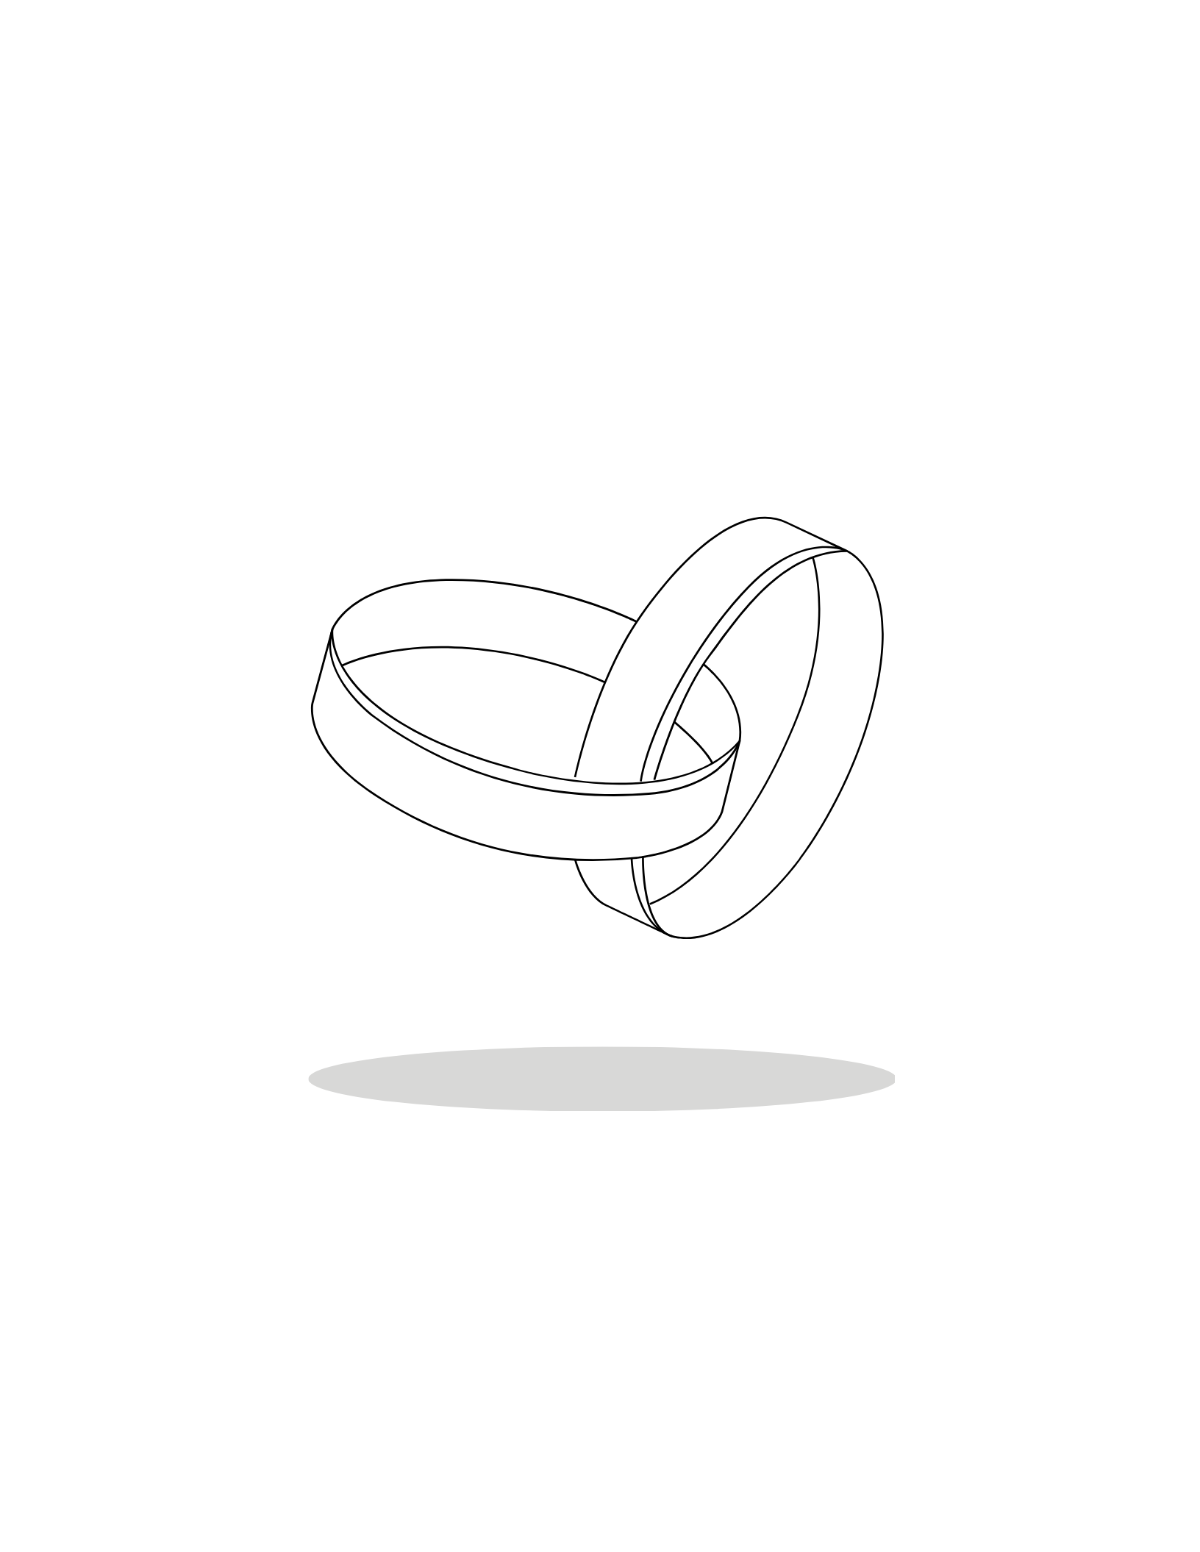 Wedding Ring Coloring Page Template